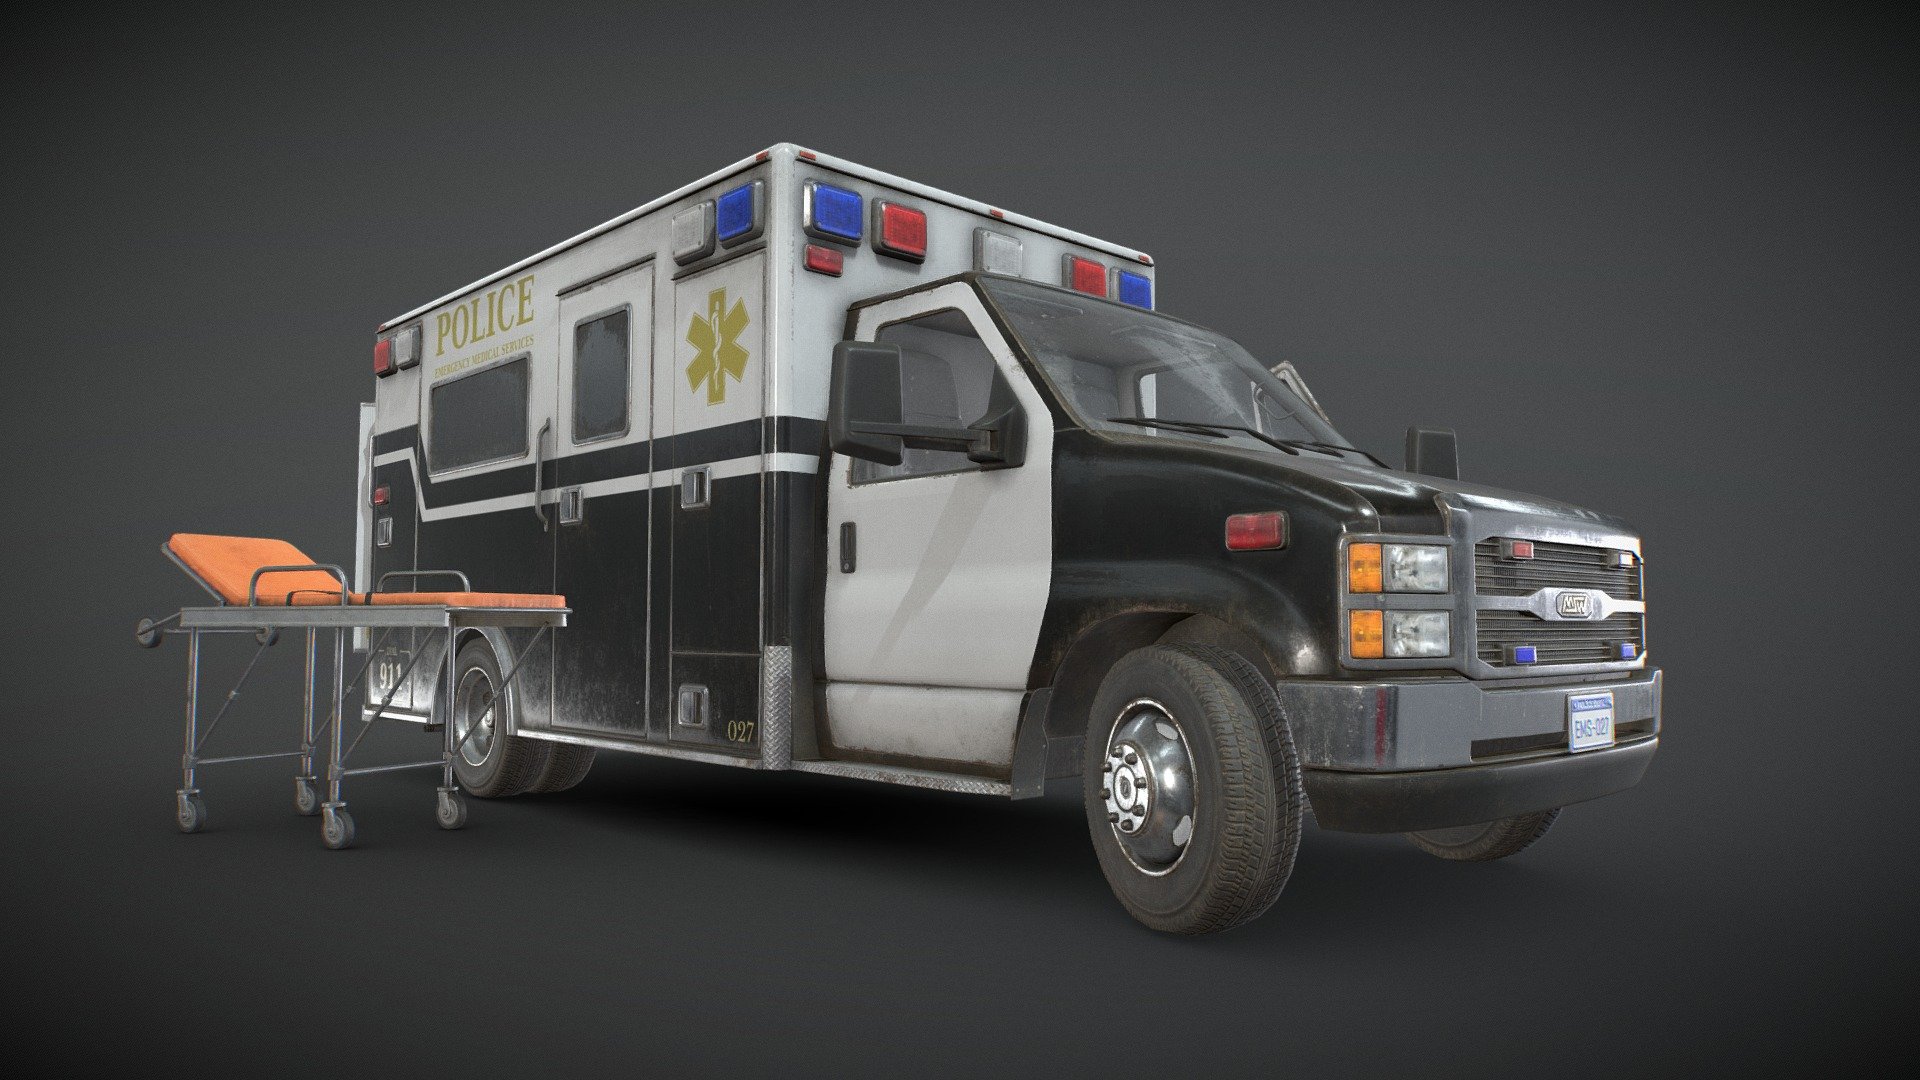 Game Ready Ambulance with finished interior and Stretcher included:


The unit of measurement used is centimeters
Front and back doors, wheels and steering wheel are separated and can be easily rigged/animated.
Interior and Box Interior are separate objects to detach if needed.
Stretcher as separate object and with 2 versions (open and folded)
PBR textures
All branding and labels are custom made
Second uv channel included
Packed ORM textures included
Average texel density: 1040 px/m

Polys:


Ambulance: 31.272 tris
Stretcher: 3.344 tris
TOTAL: 34.616 tris

Maps sizes: 


Body: 4096x4096
Details: 4096x4096
Interior: 4096x4096
Box Interior: 4096x4096
Wheels: 2048x2048
Windows: 2048x2048
Stretcher: 2048x2048

Provided Maps:


Albedo 
Normal
Roughness
Metalness
AO
Opacity included in Albedo (windows)
Emissive

Formats Incuded - MAX / BLEND / OBJ / FBX 

This model can be used for any game, film, personal project, etc. You may not resell or redistribute - Ambulance Type 5 - Low Poly - Buy Royalty Free 3D model by MSWoodvine 3d model